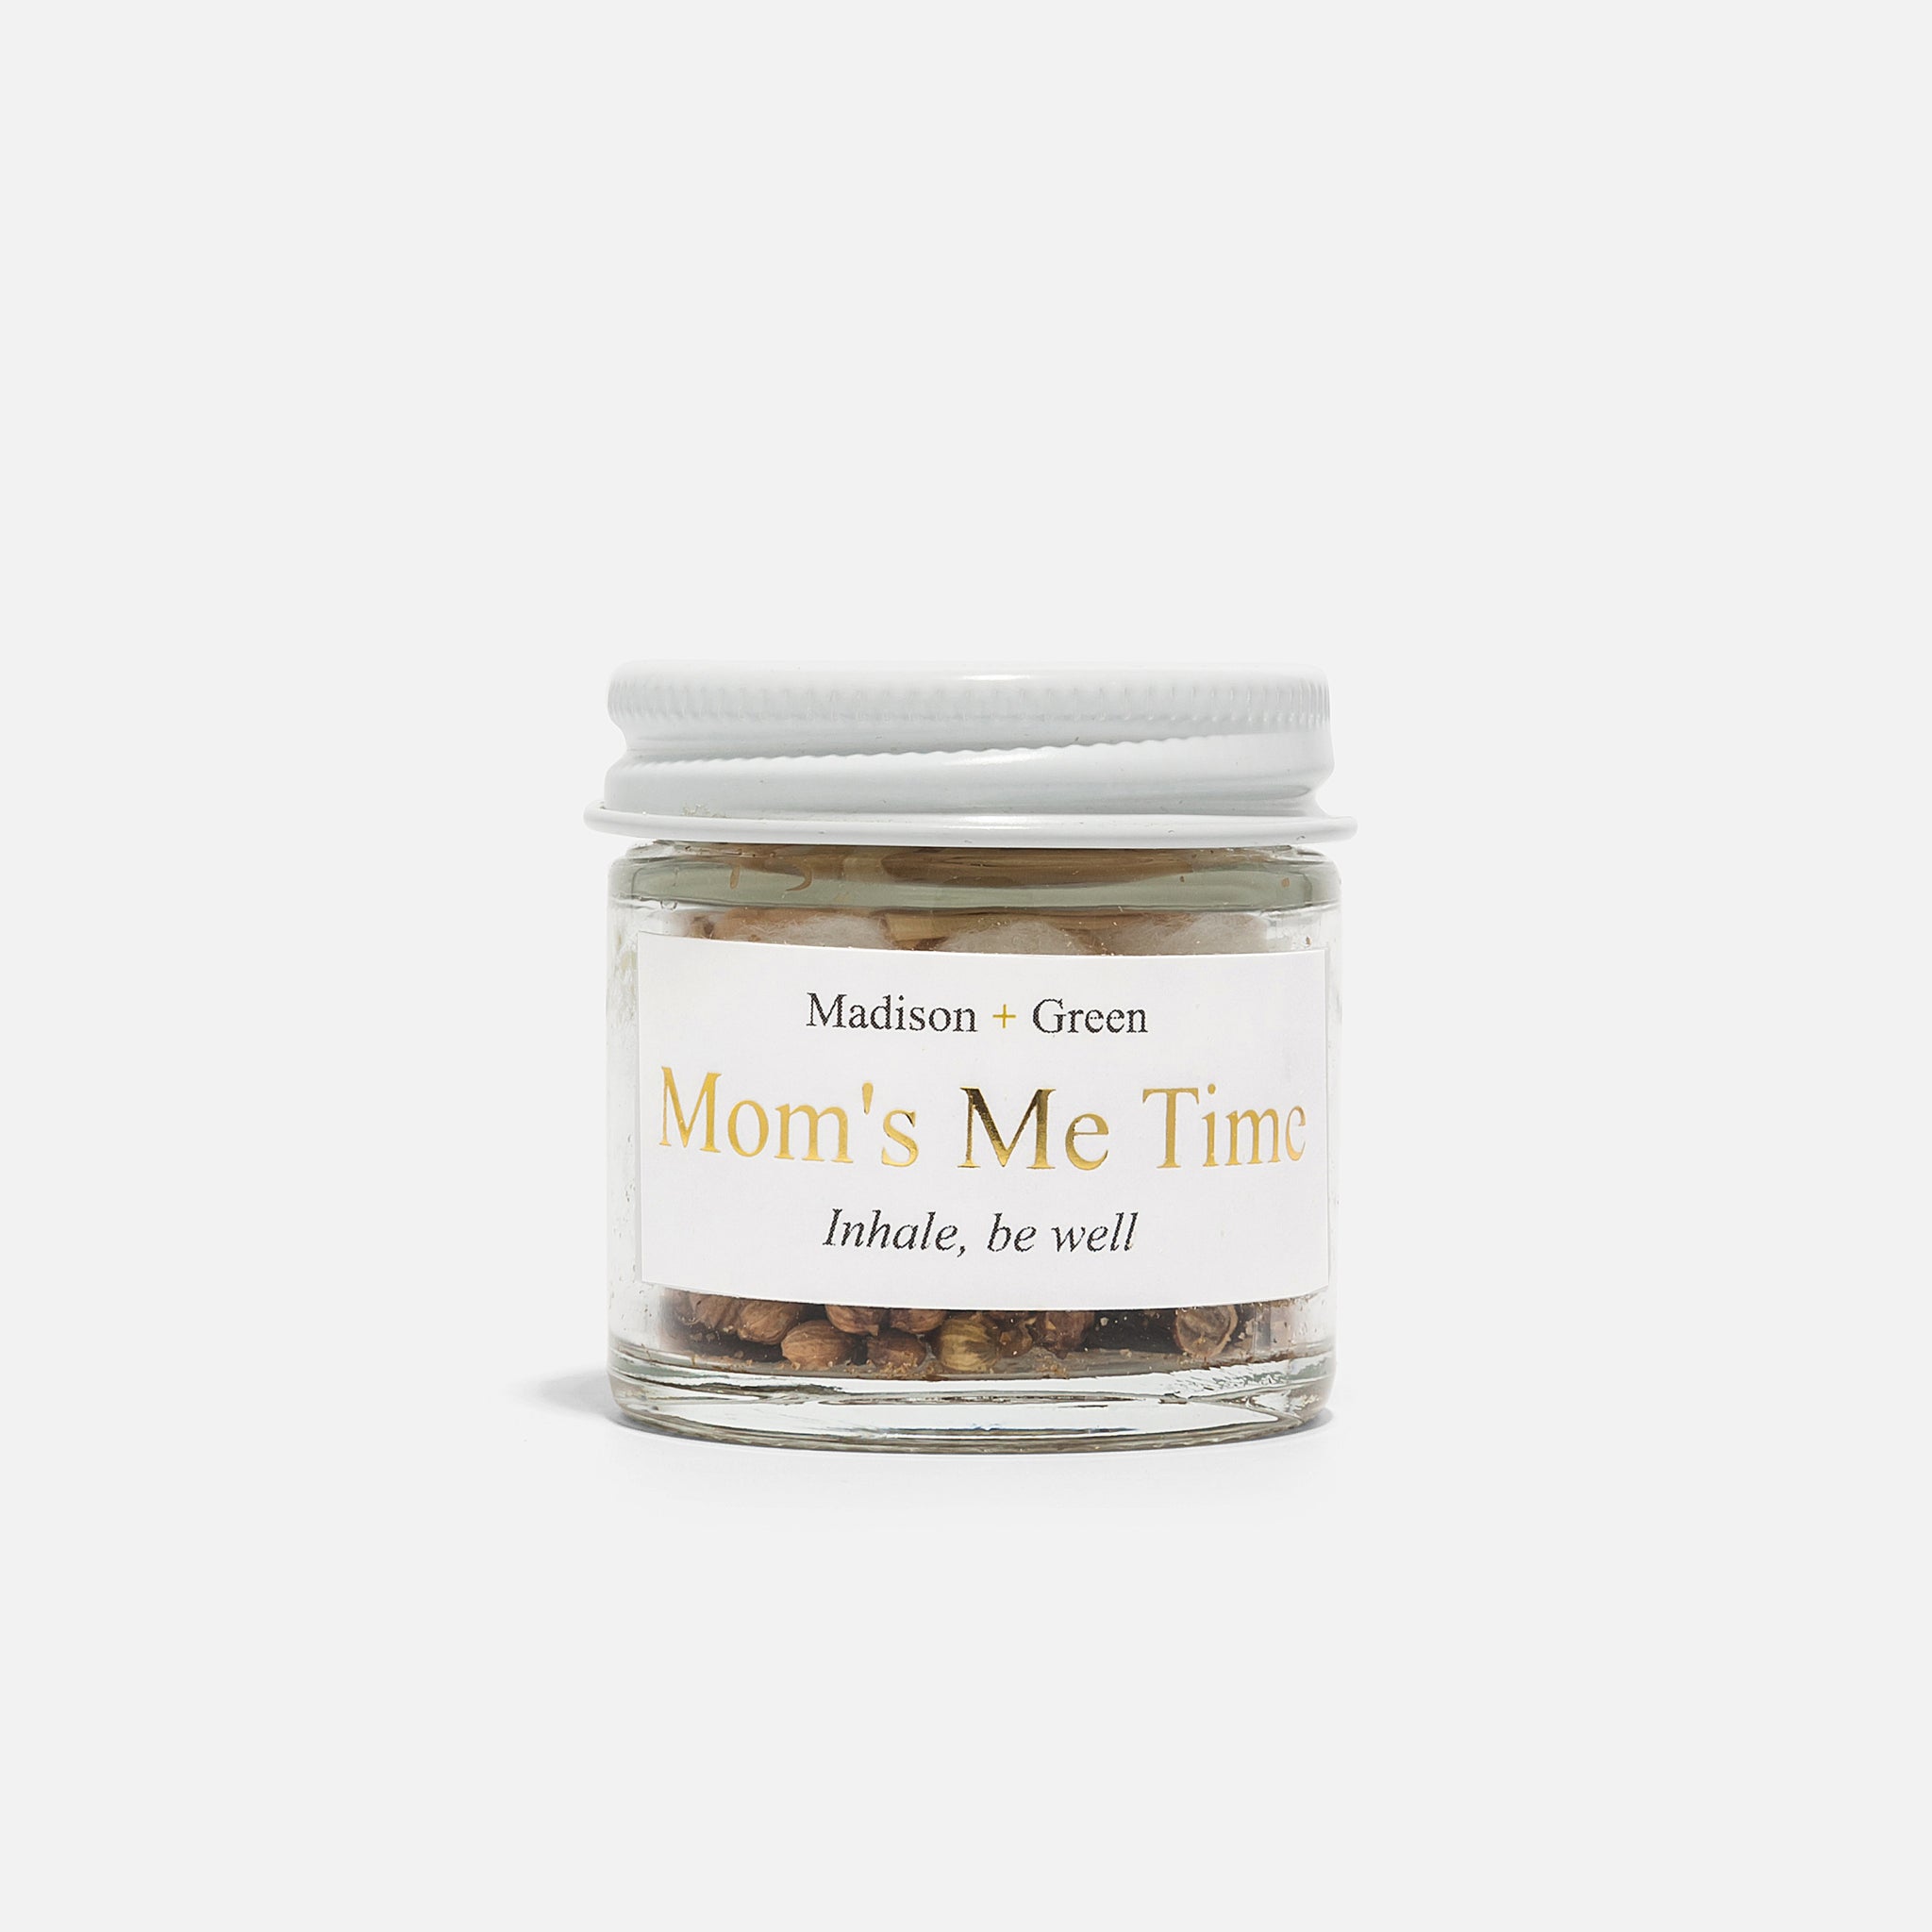 "Mom's Me Time" Aromatherapy Stress Reliever for Mothers